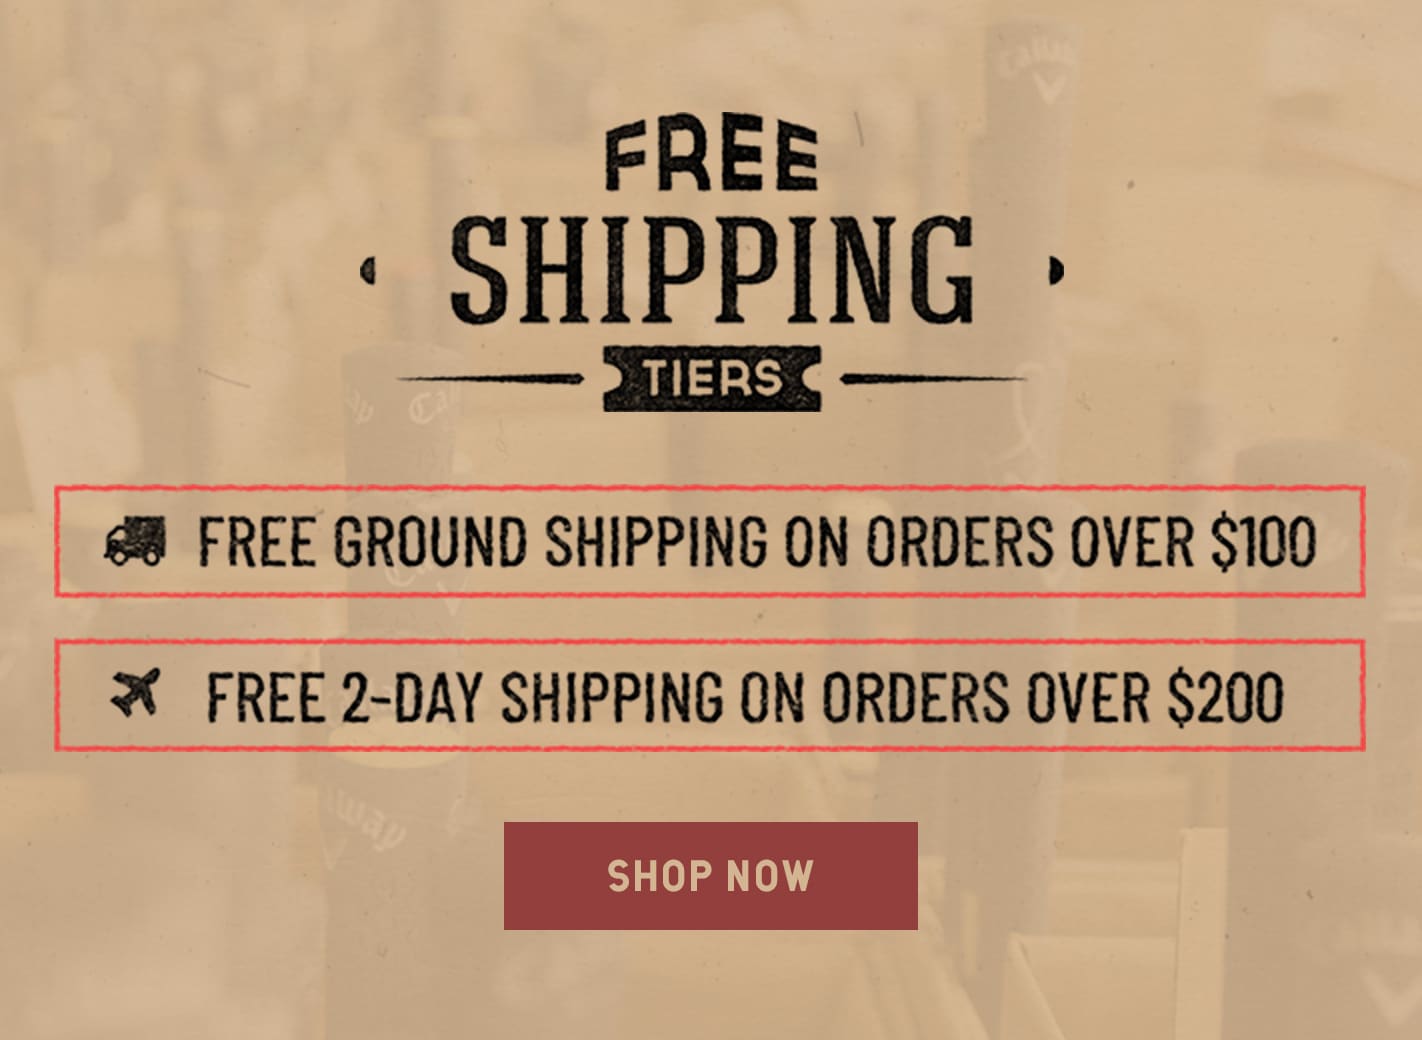 Free Shipping Tiers. Free Ground on orders over $100 and 2-Day on Orders over $200.